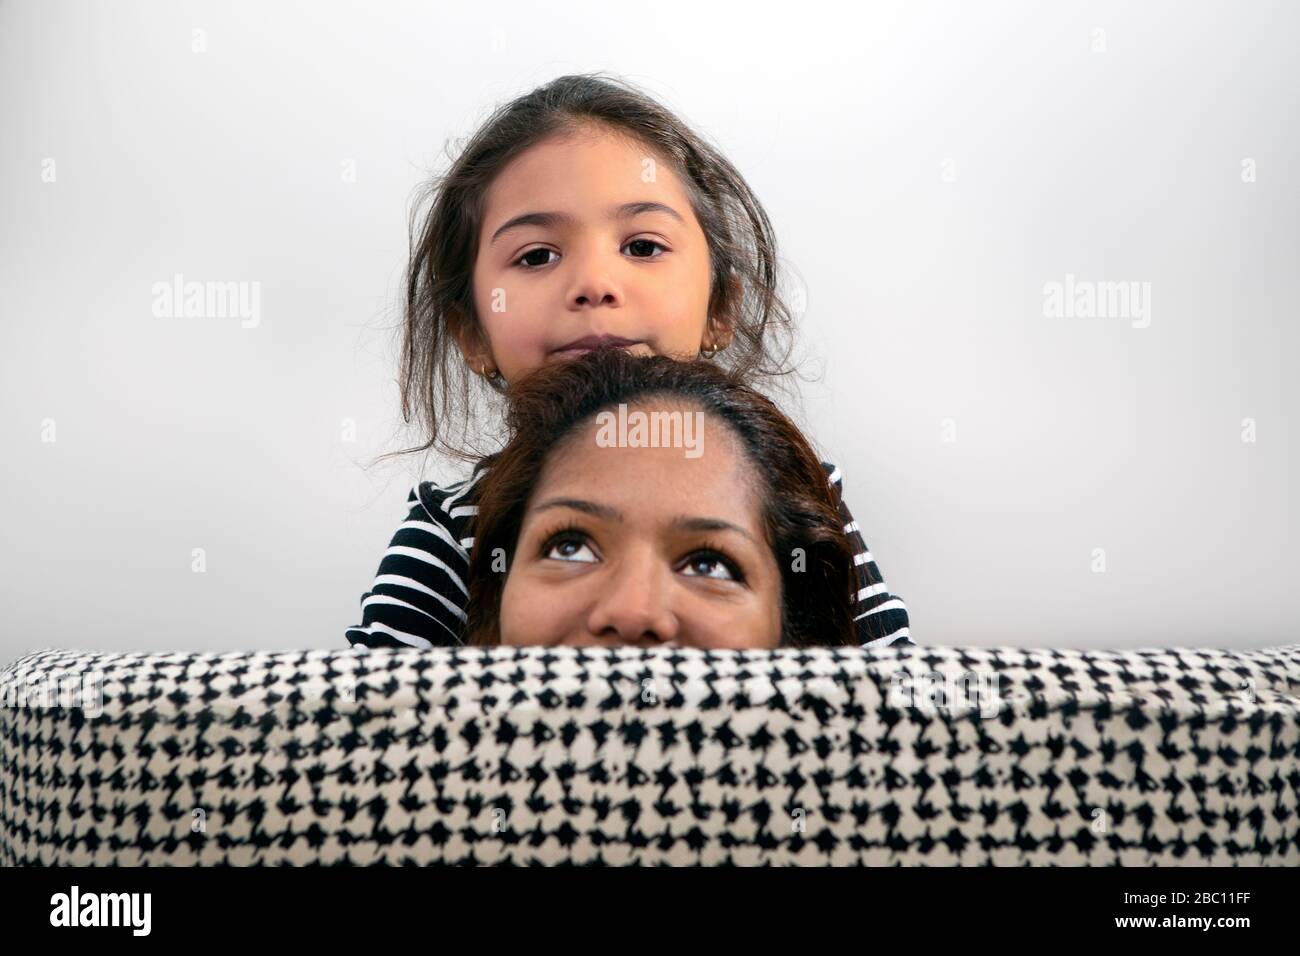 Portrait of little girl and her mother hiding behind back rest of lounge chair Stock Photo